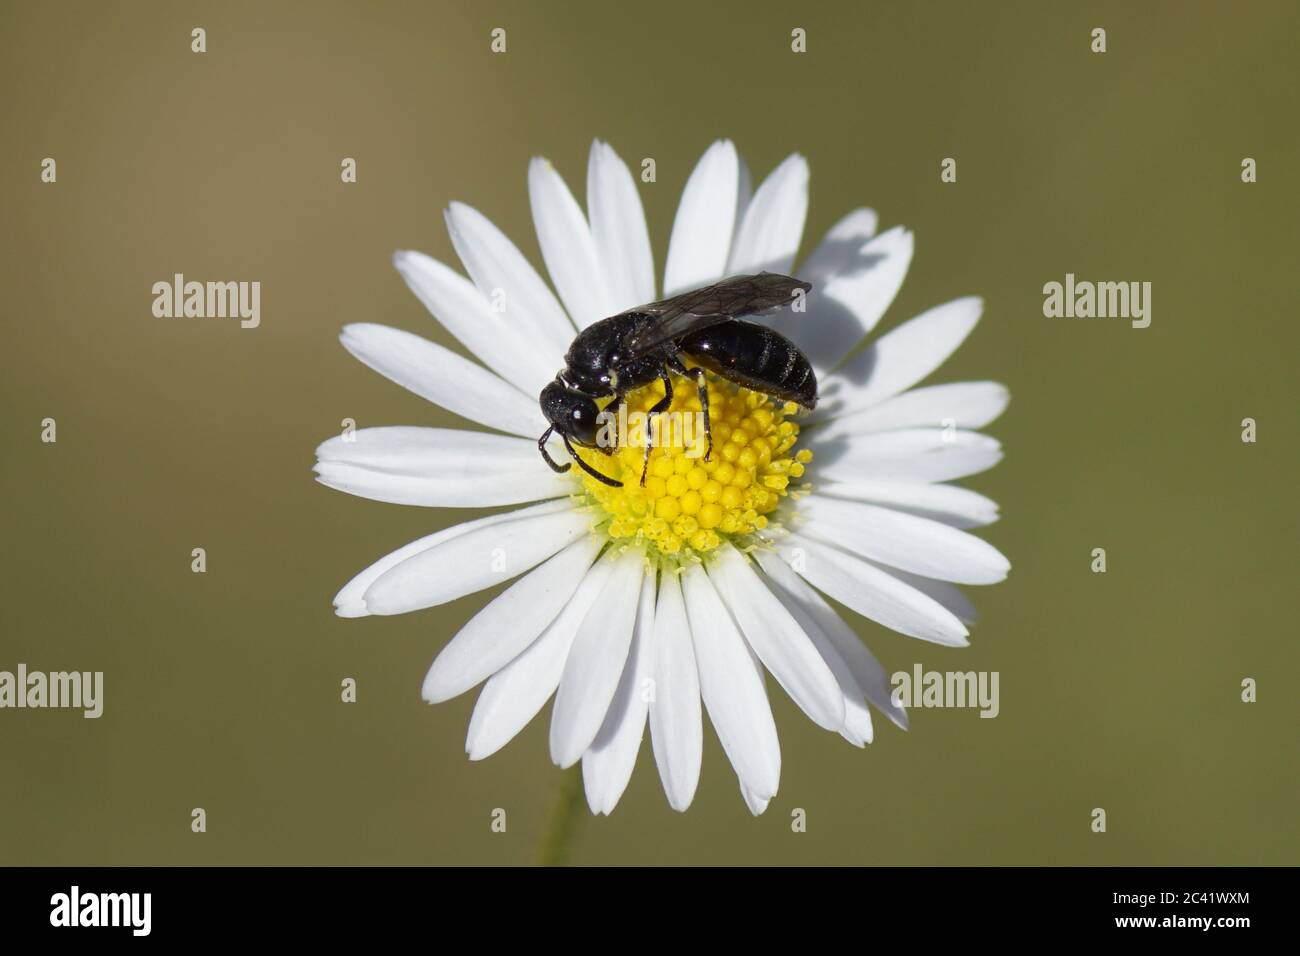 Hylaeus communis (Common Yellow-face Bee), family plasterer bees, polyester bees (Colletidae). Flower of common daisy Bellis perennis, Stock Photo